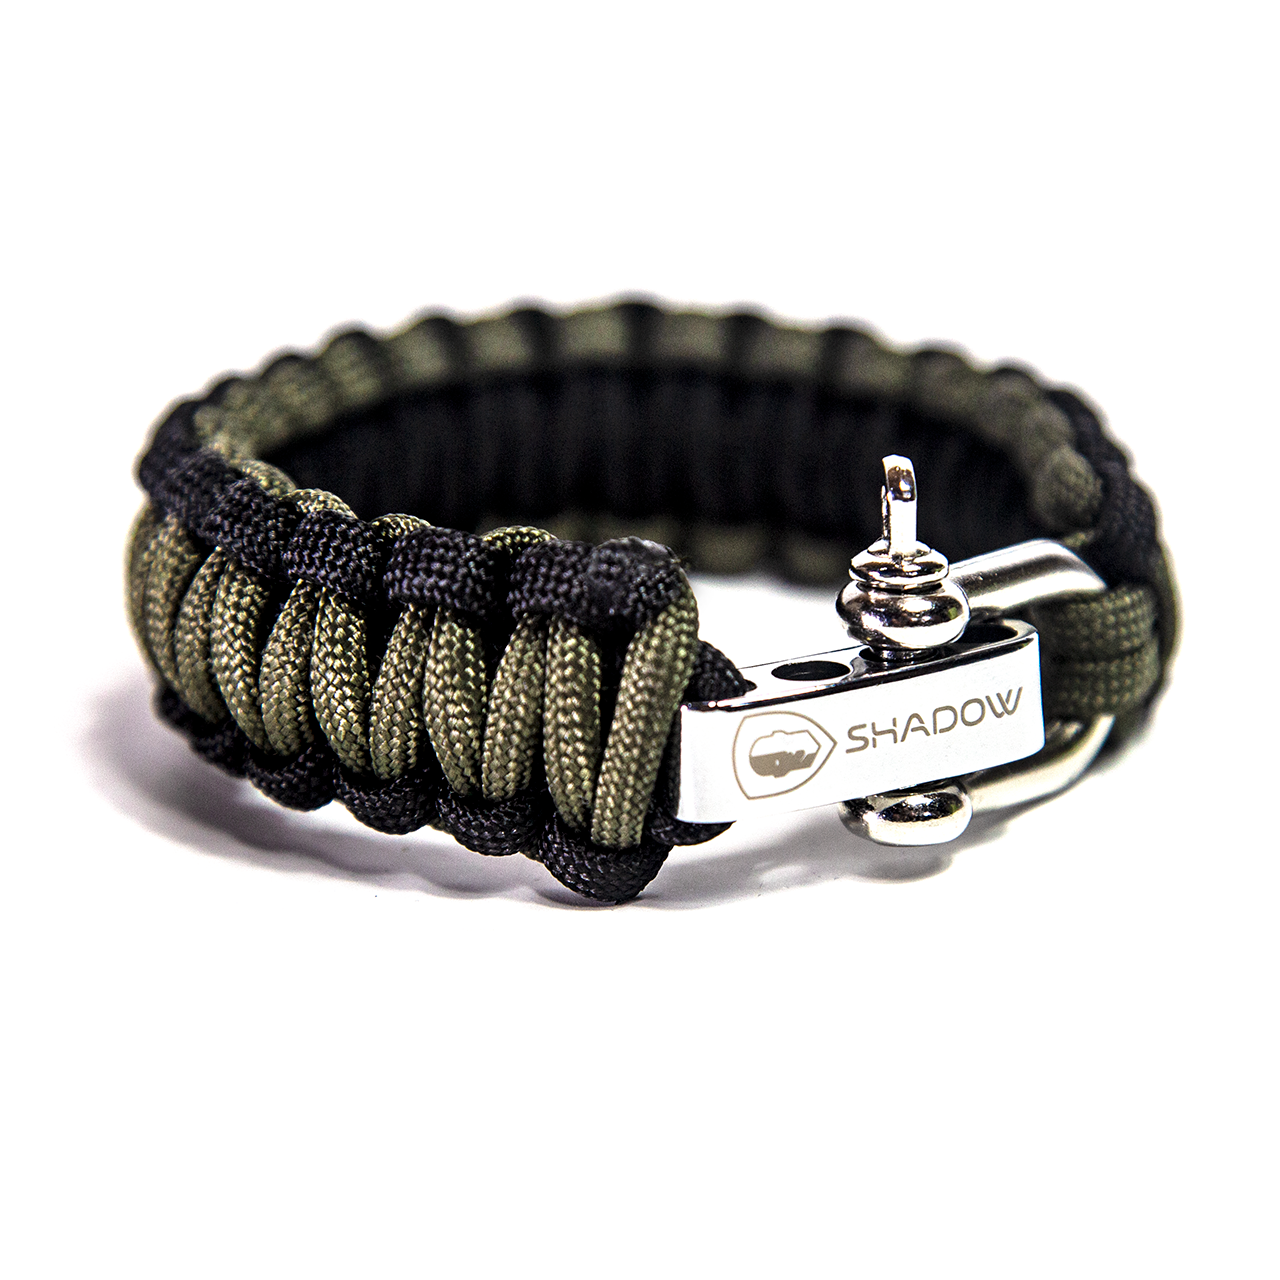 Shadow Strategic offers a high quality Paracord Survival Bracelet with laser engraved Shadow branding.